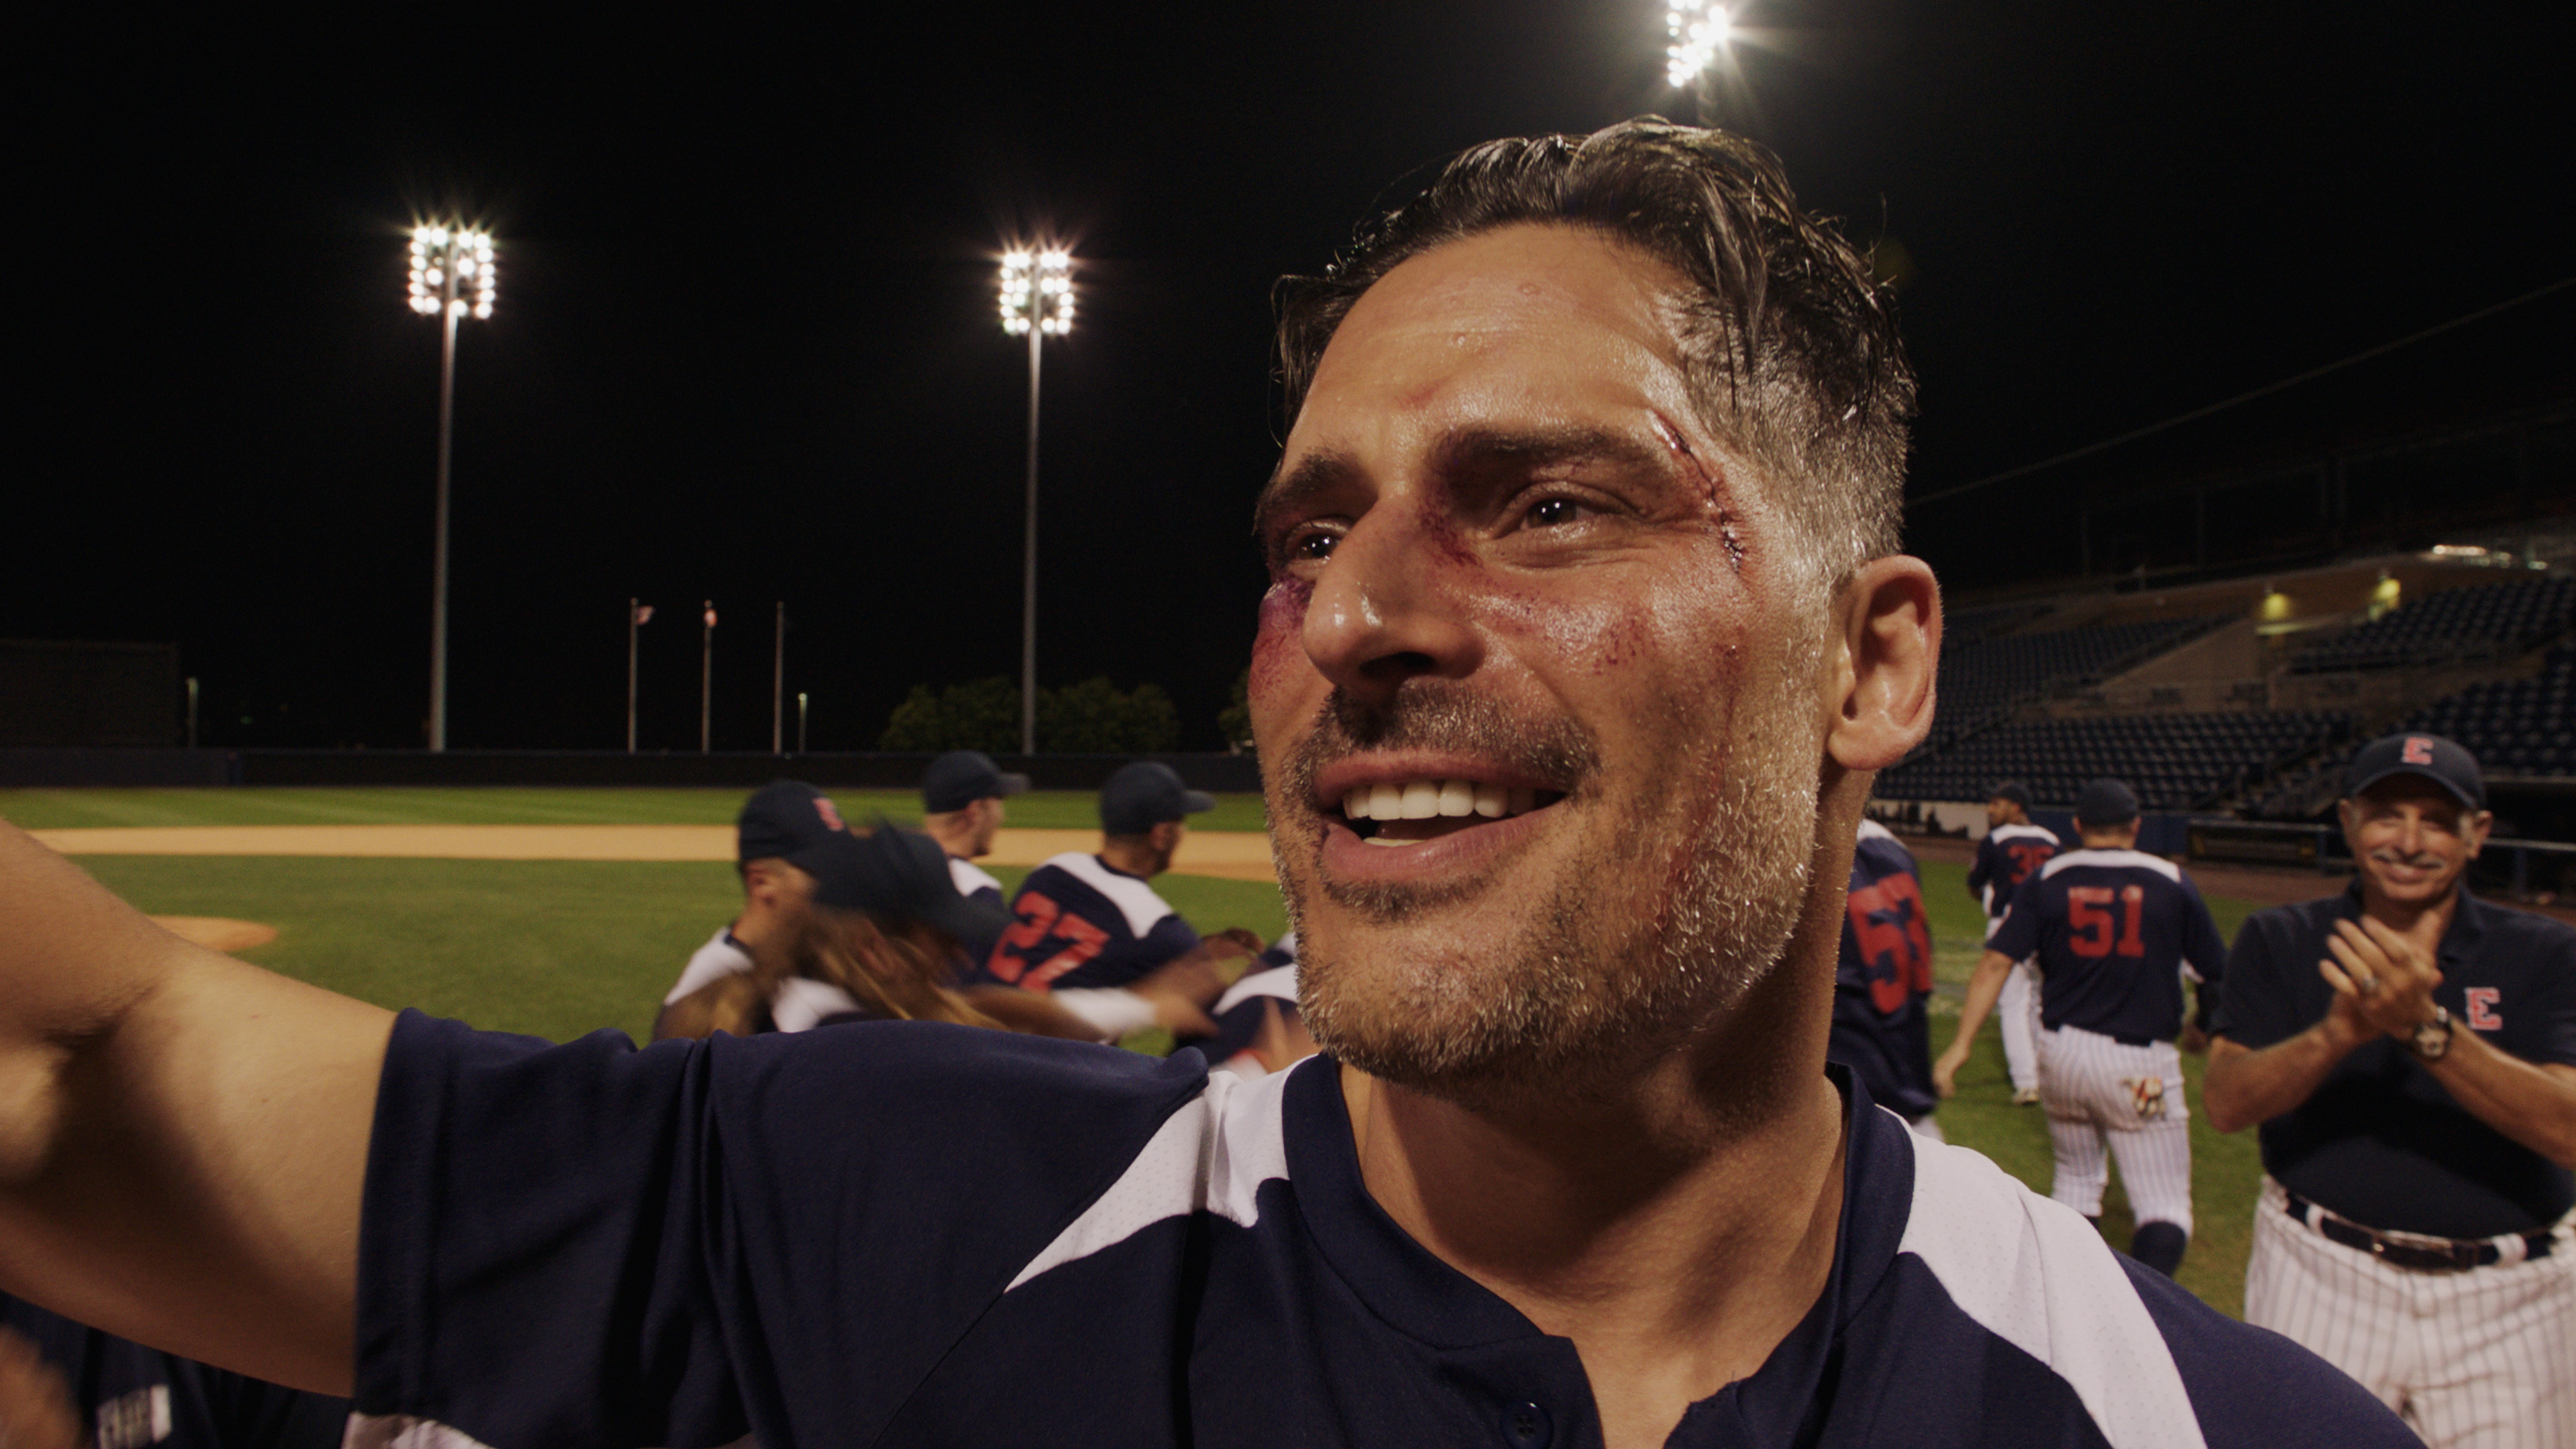 Sonny (Joe Manganiello) after hitting a home run in Bottom of the 9th.